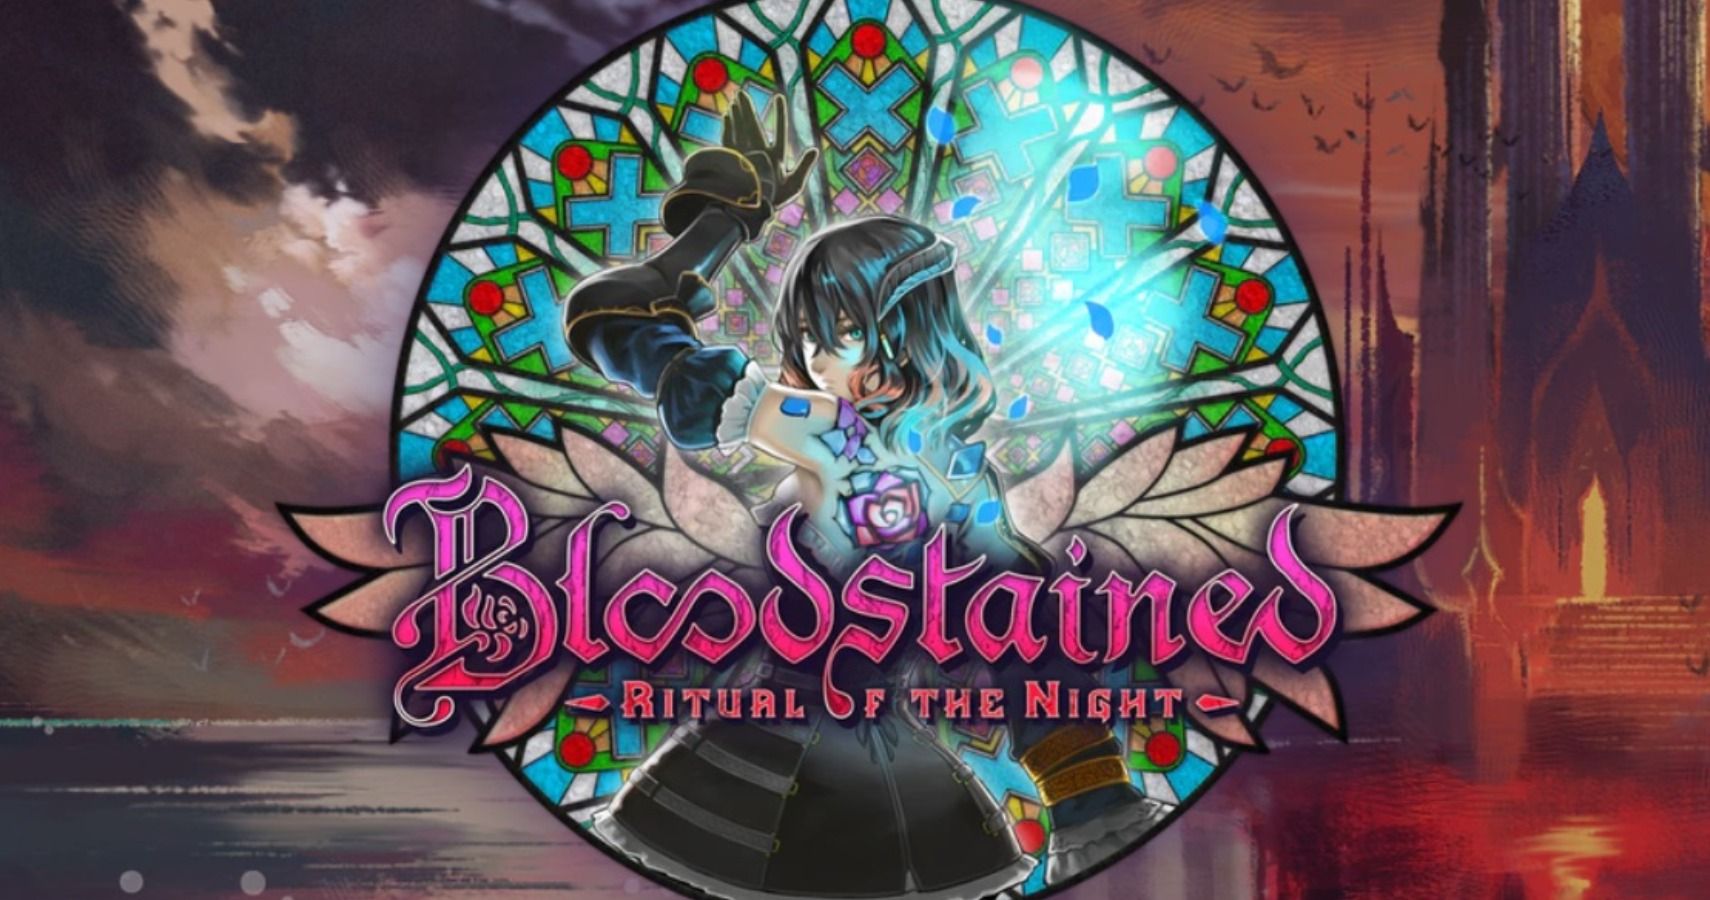 Bloodstained Ritual Of The Night Devs Focus On Switch Fixes Before DLC